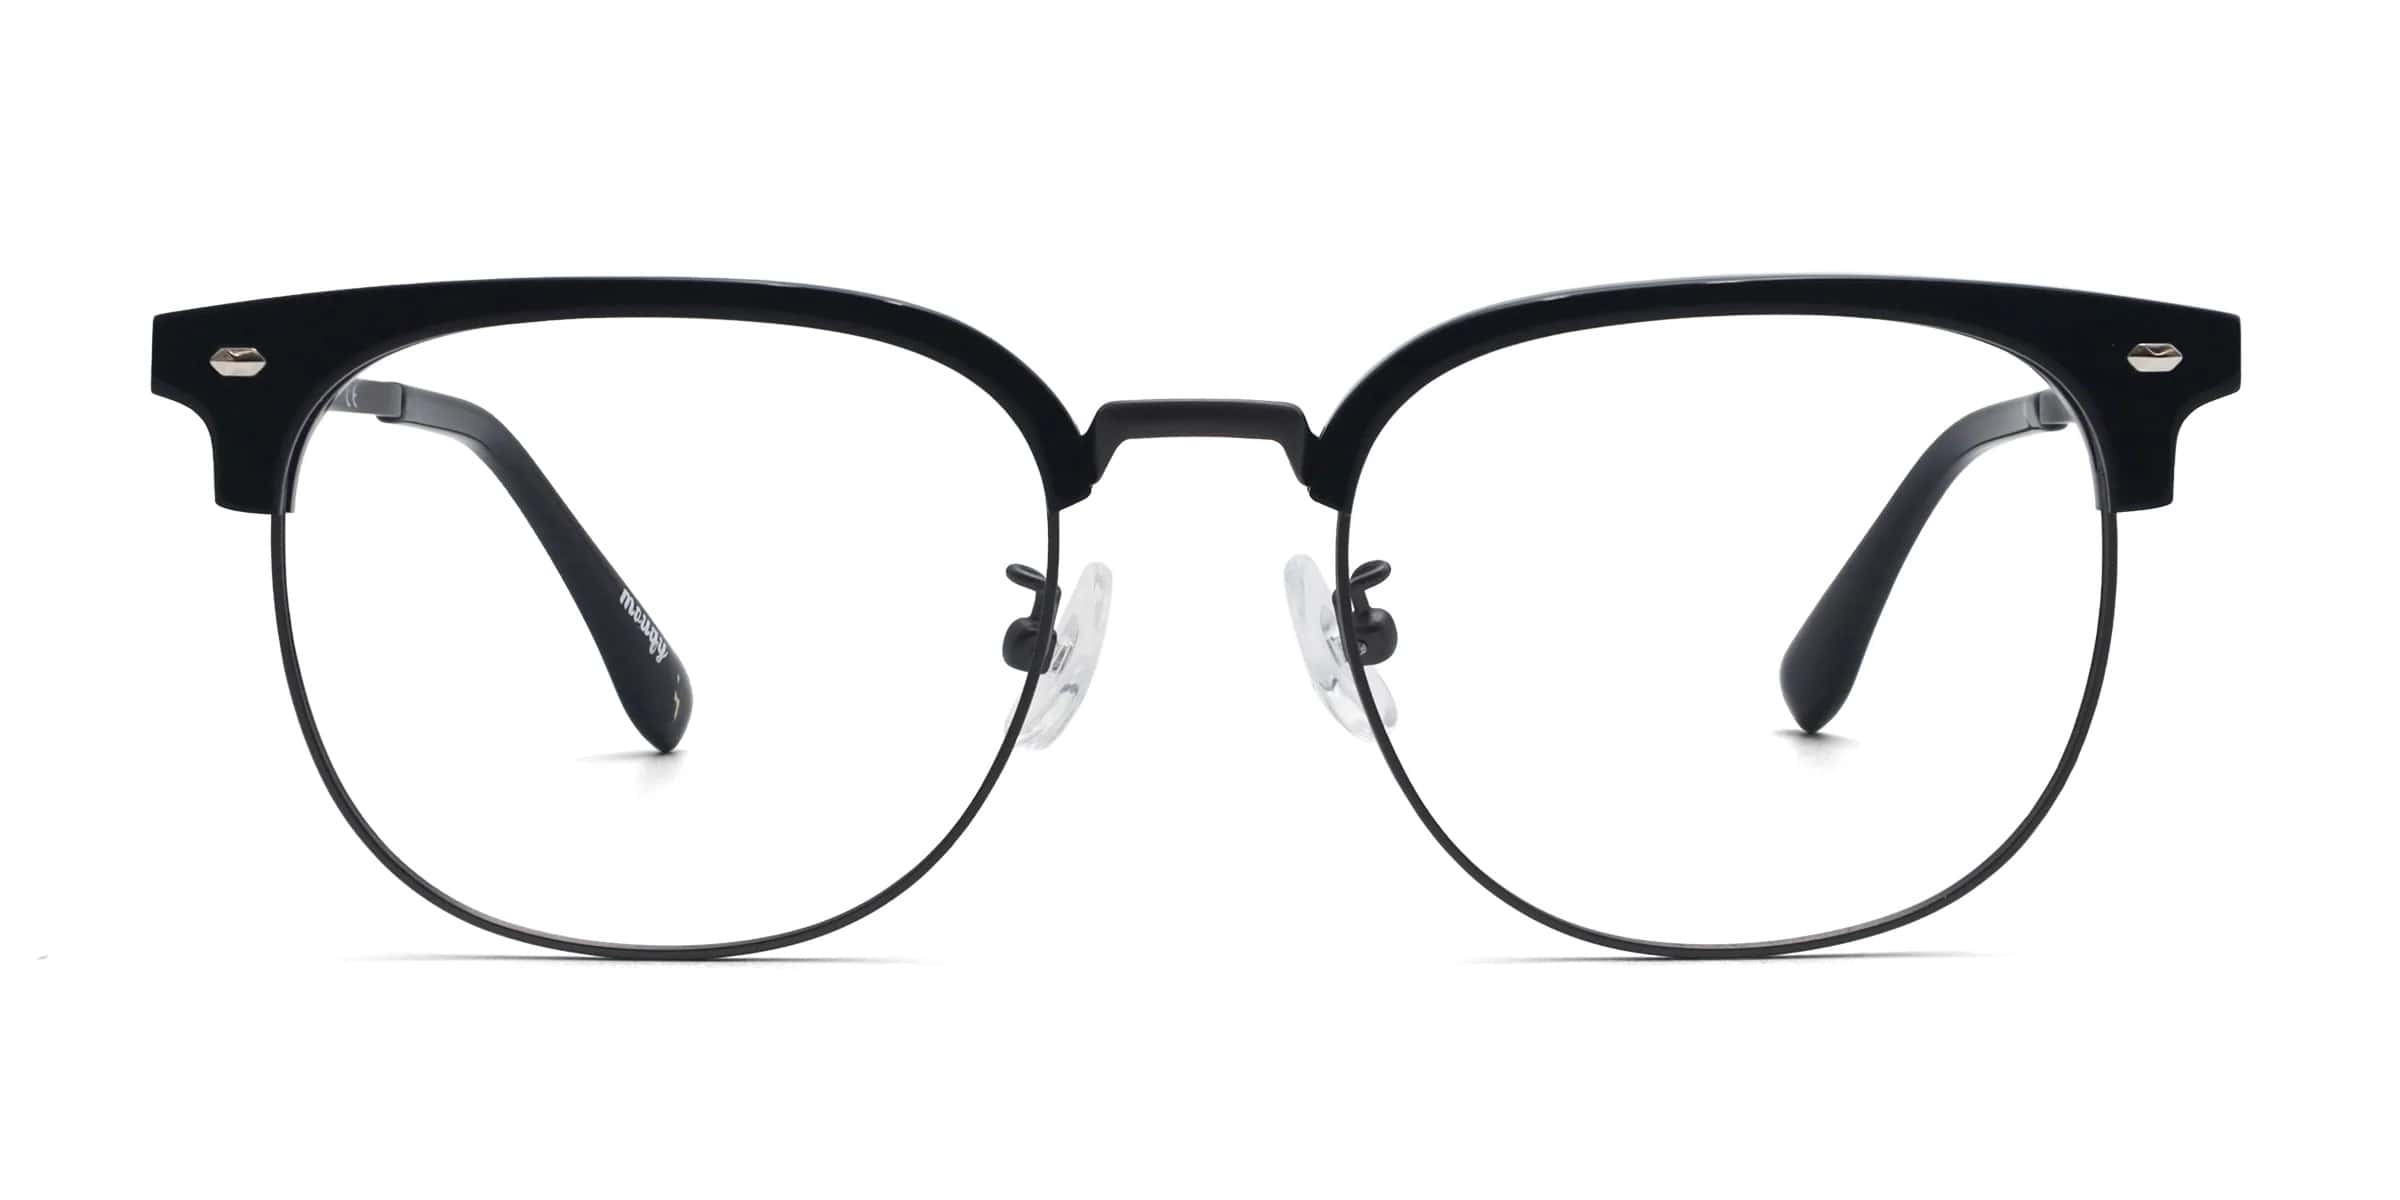 mouqy timber browline black frame